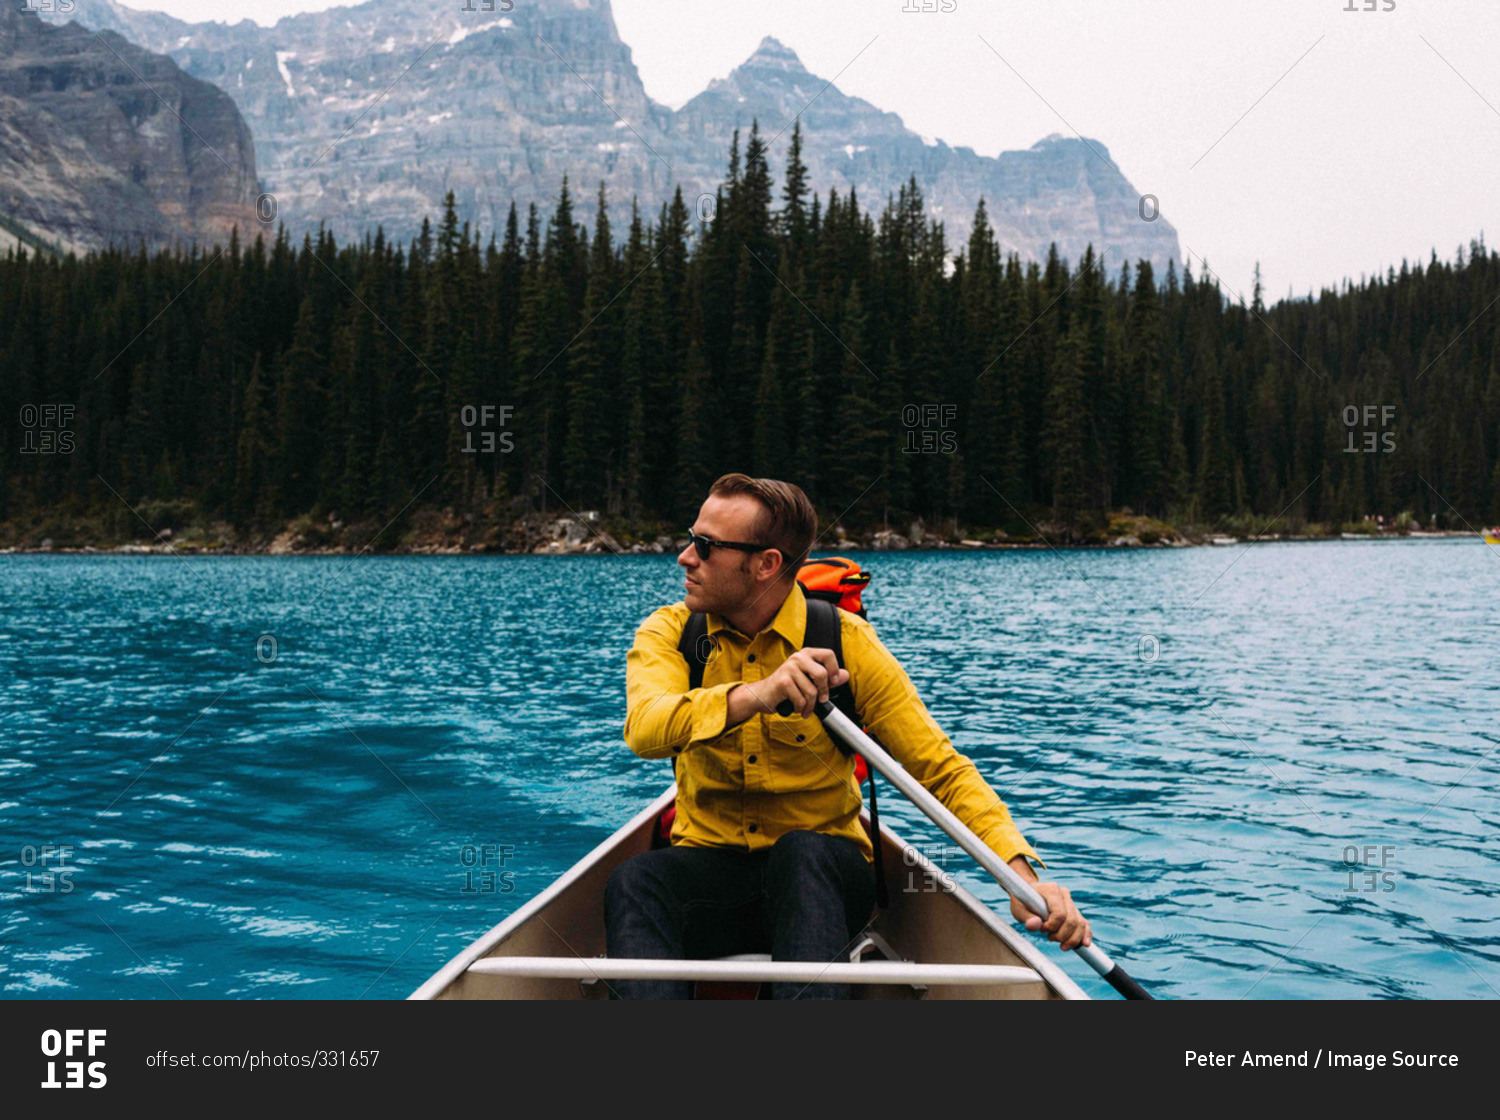 Front view of mid adult man paddling canoe, looking away, Moraine lake, Banff National Park, Alberta Canada